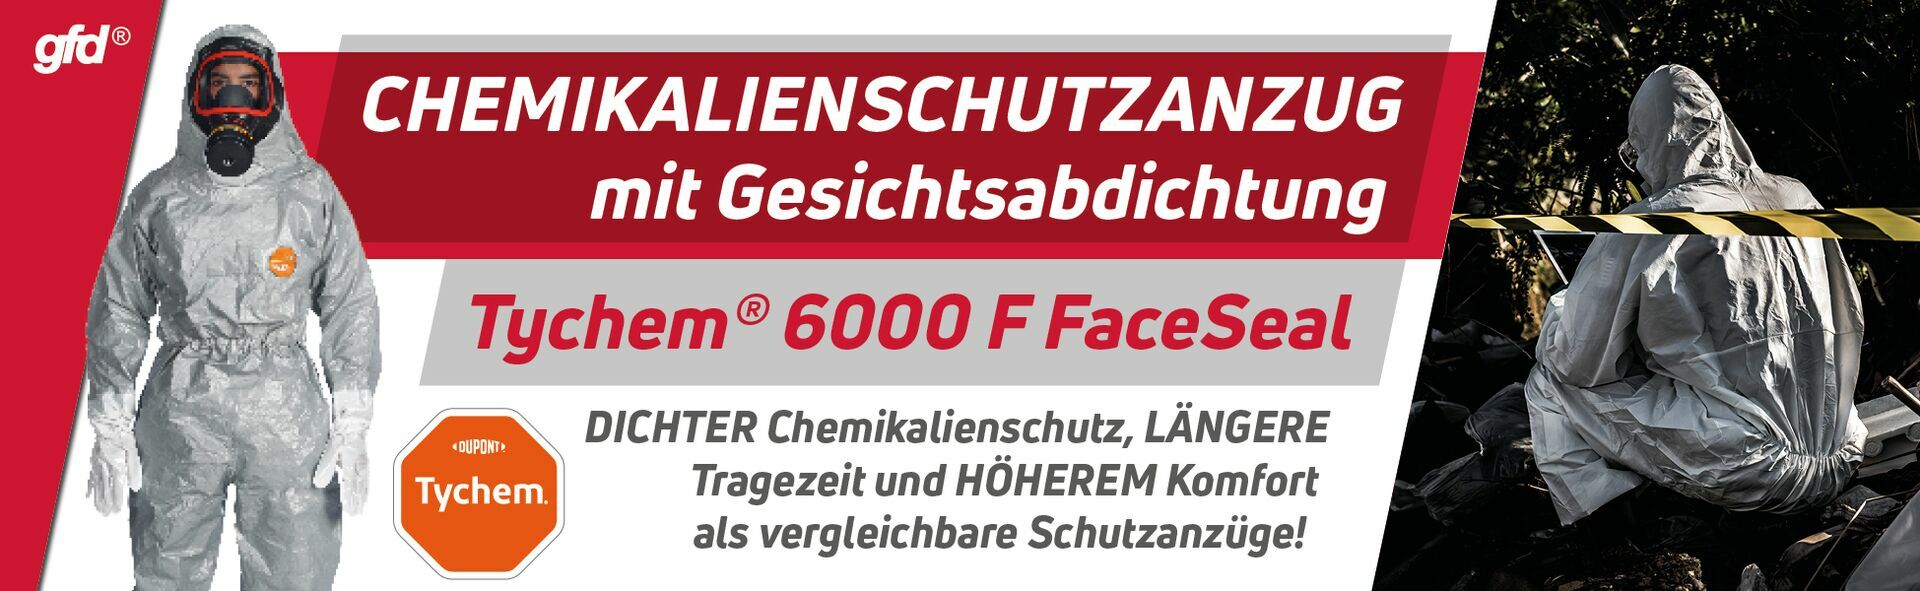 Dupont Tychem 6000F FaceSeal